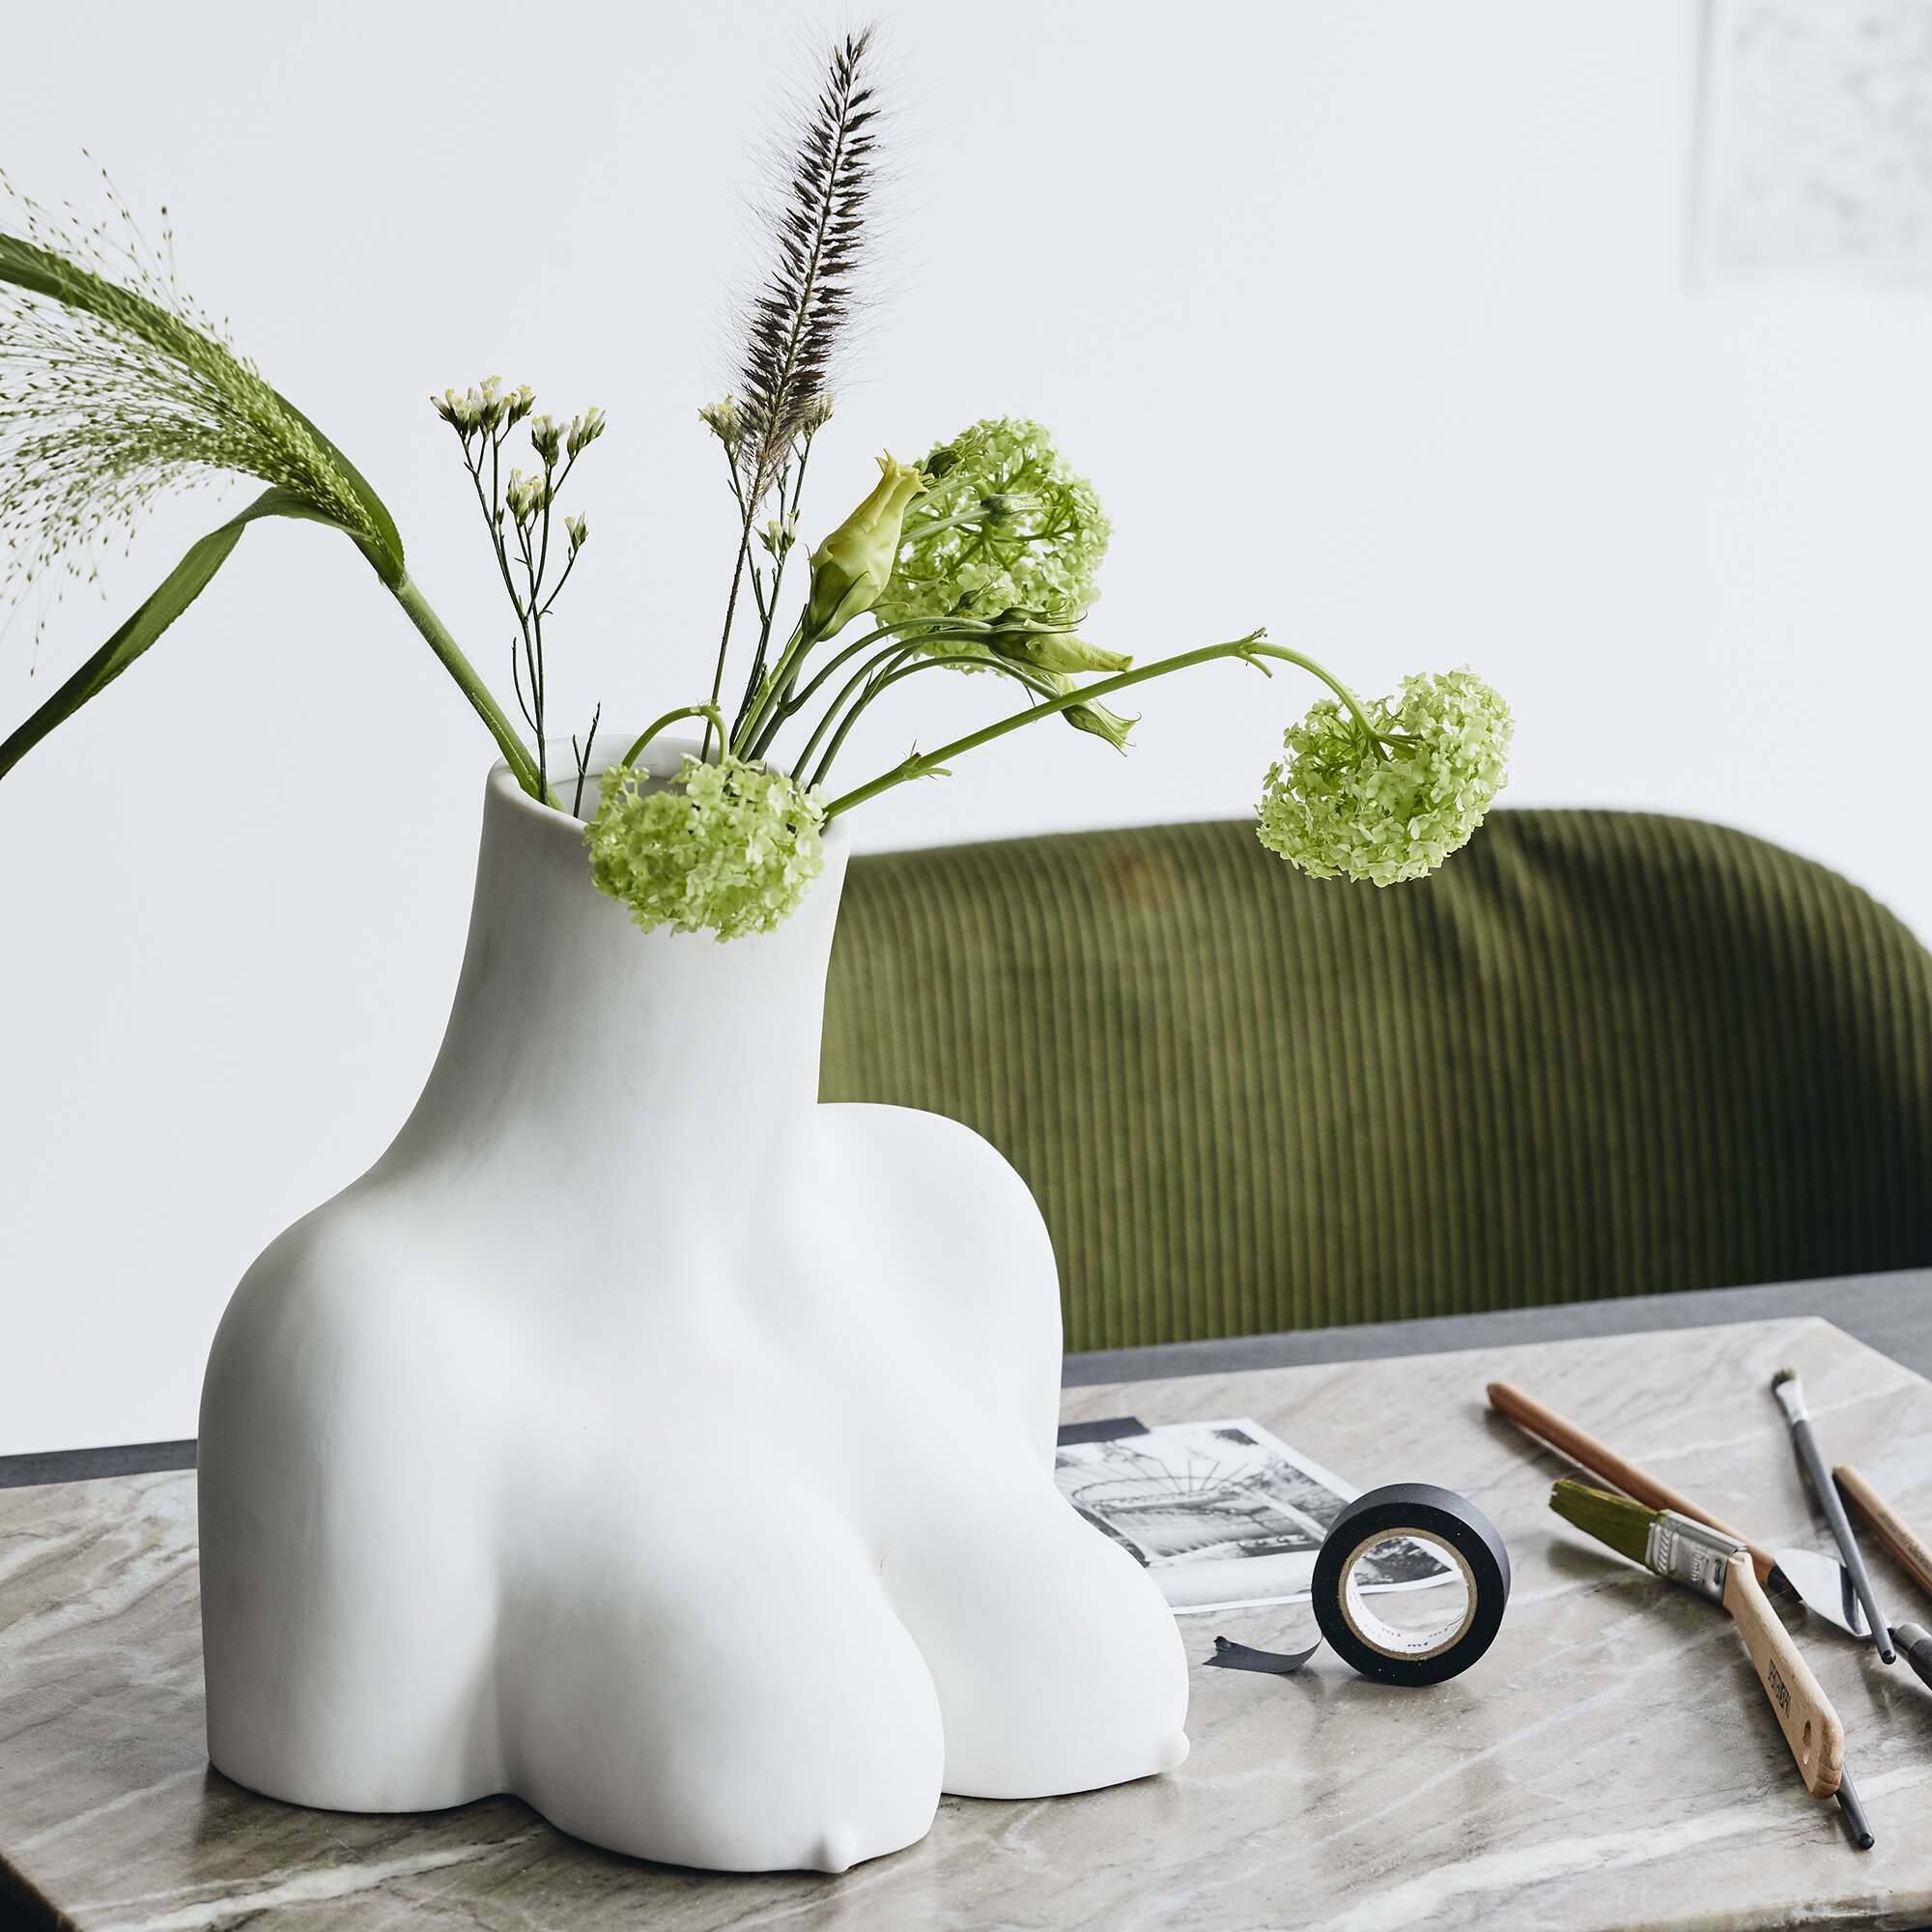 Read more about Graham and green bust vase